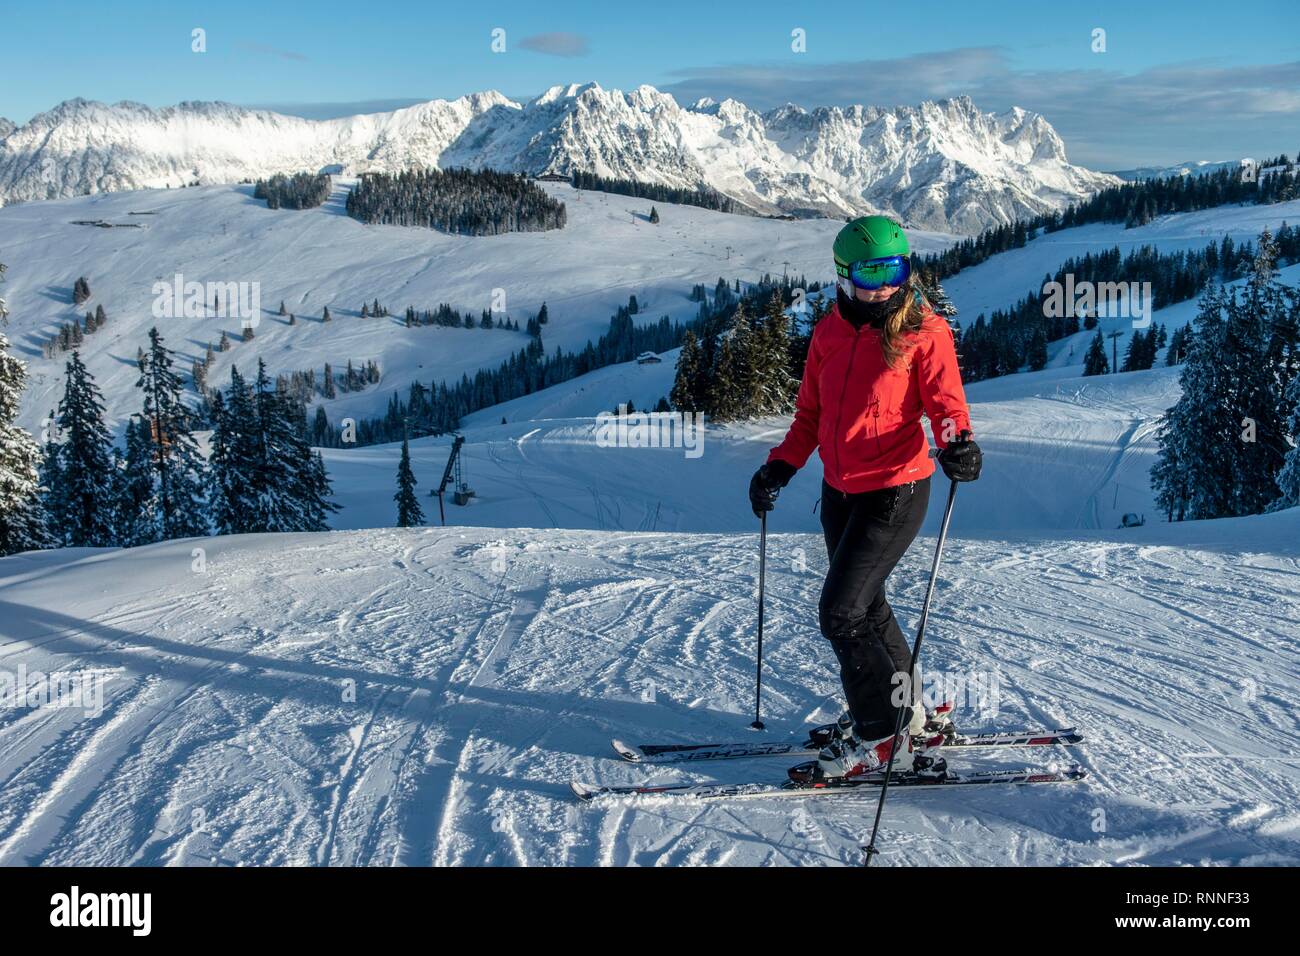 Woman skiing, view from the ski area SkiWelt Wilder Kaiser Brixenthal to the mountain massif Wilder Kaiser, Tyrol, Austria Stock Photo